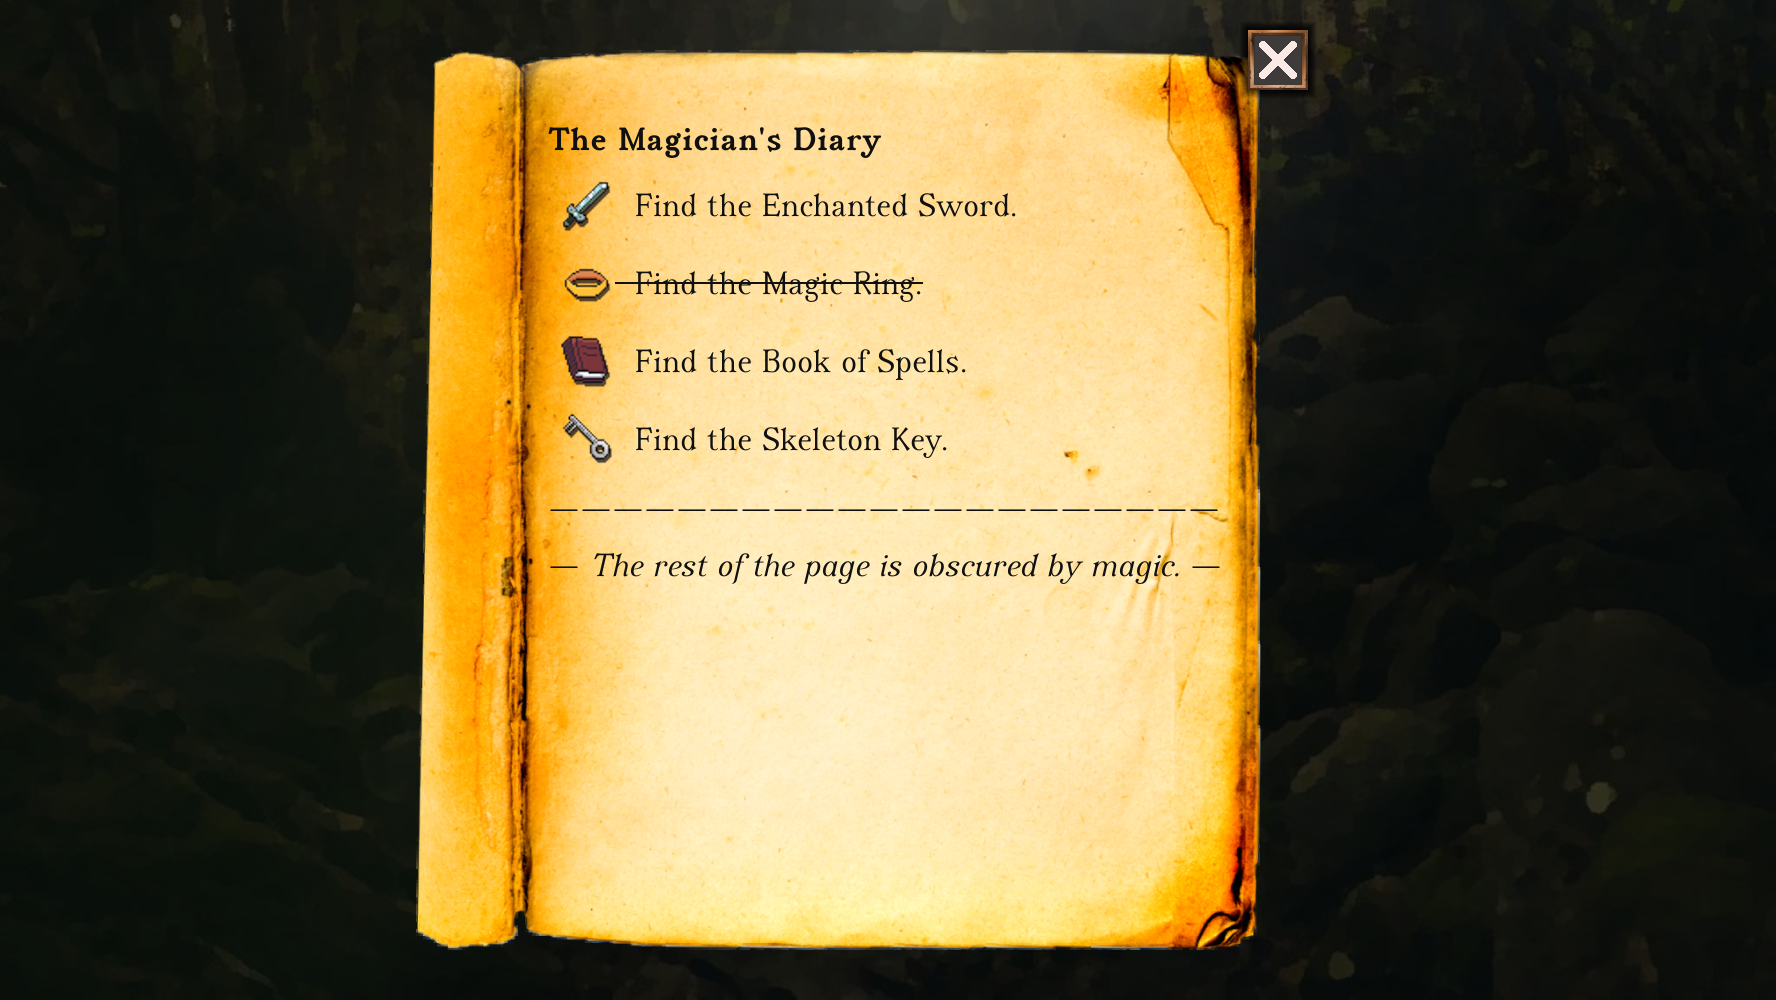 Screenshot of the Magician’s Diary. It says: Find the enchanted sword, Find the magic ring (this line is crossed out), Find the book of spells, Find the skeleton key, and The rest of the page is obscured by magic.